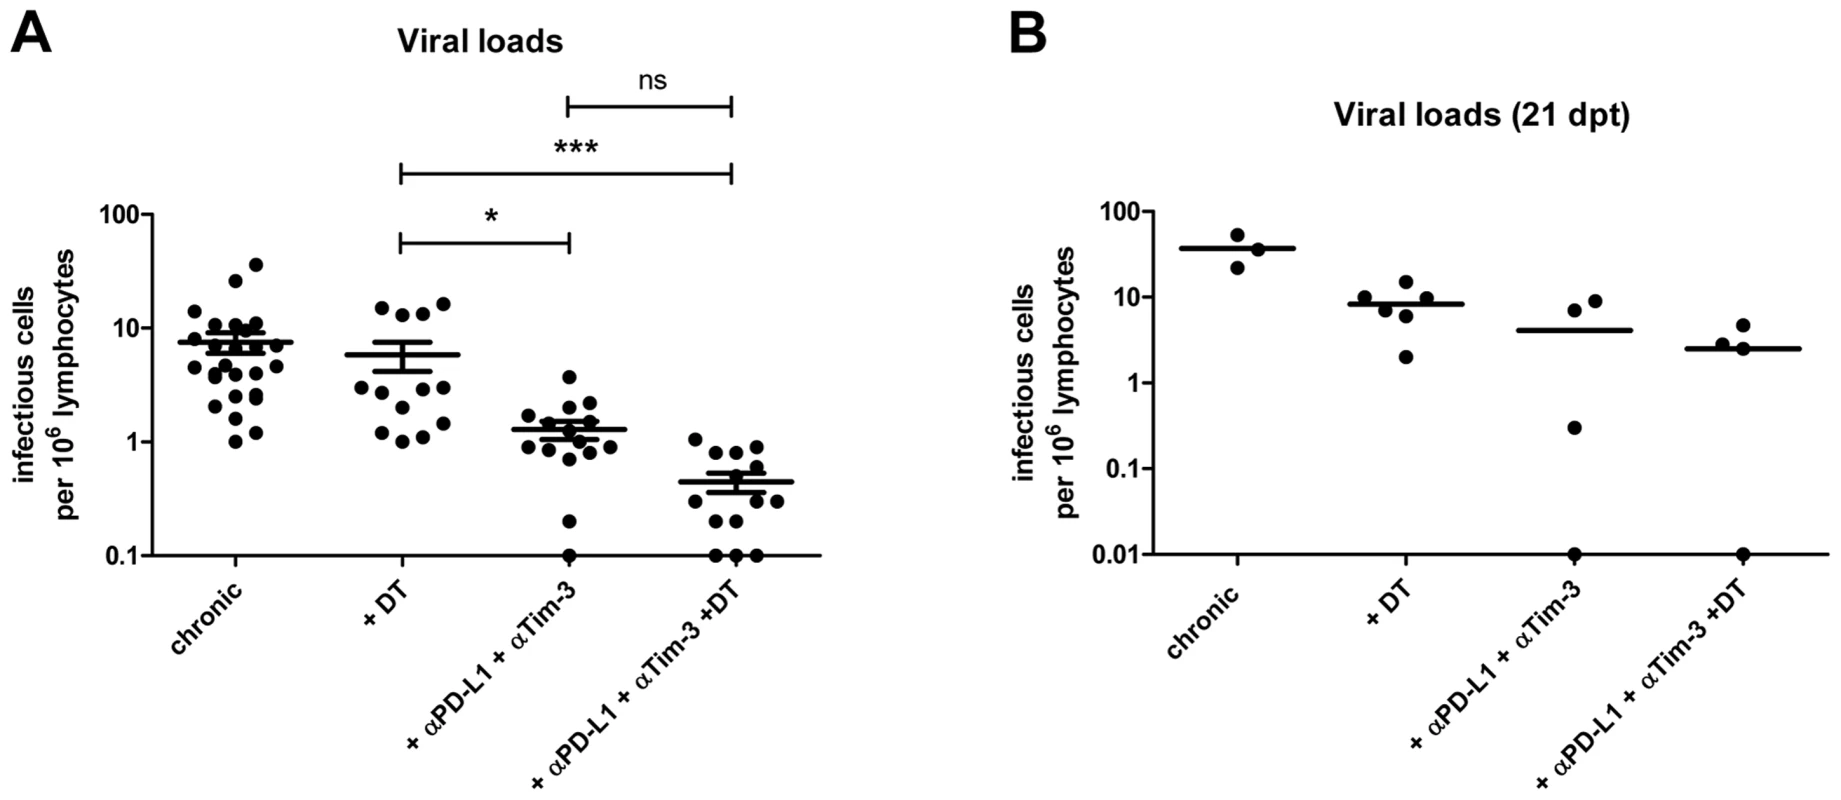 Viral loads in chronic infection after Treg depletion and/or blocking of inhibitory pathways.